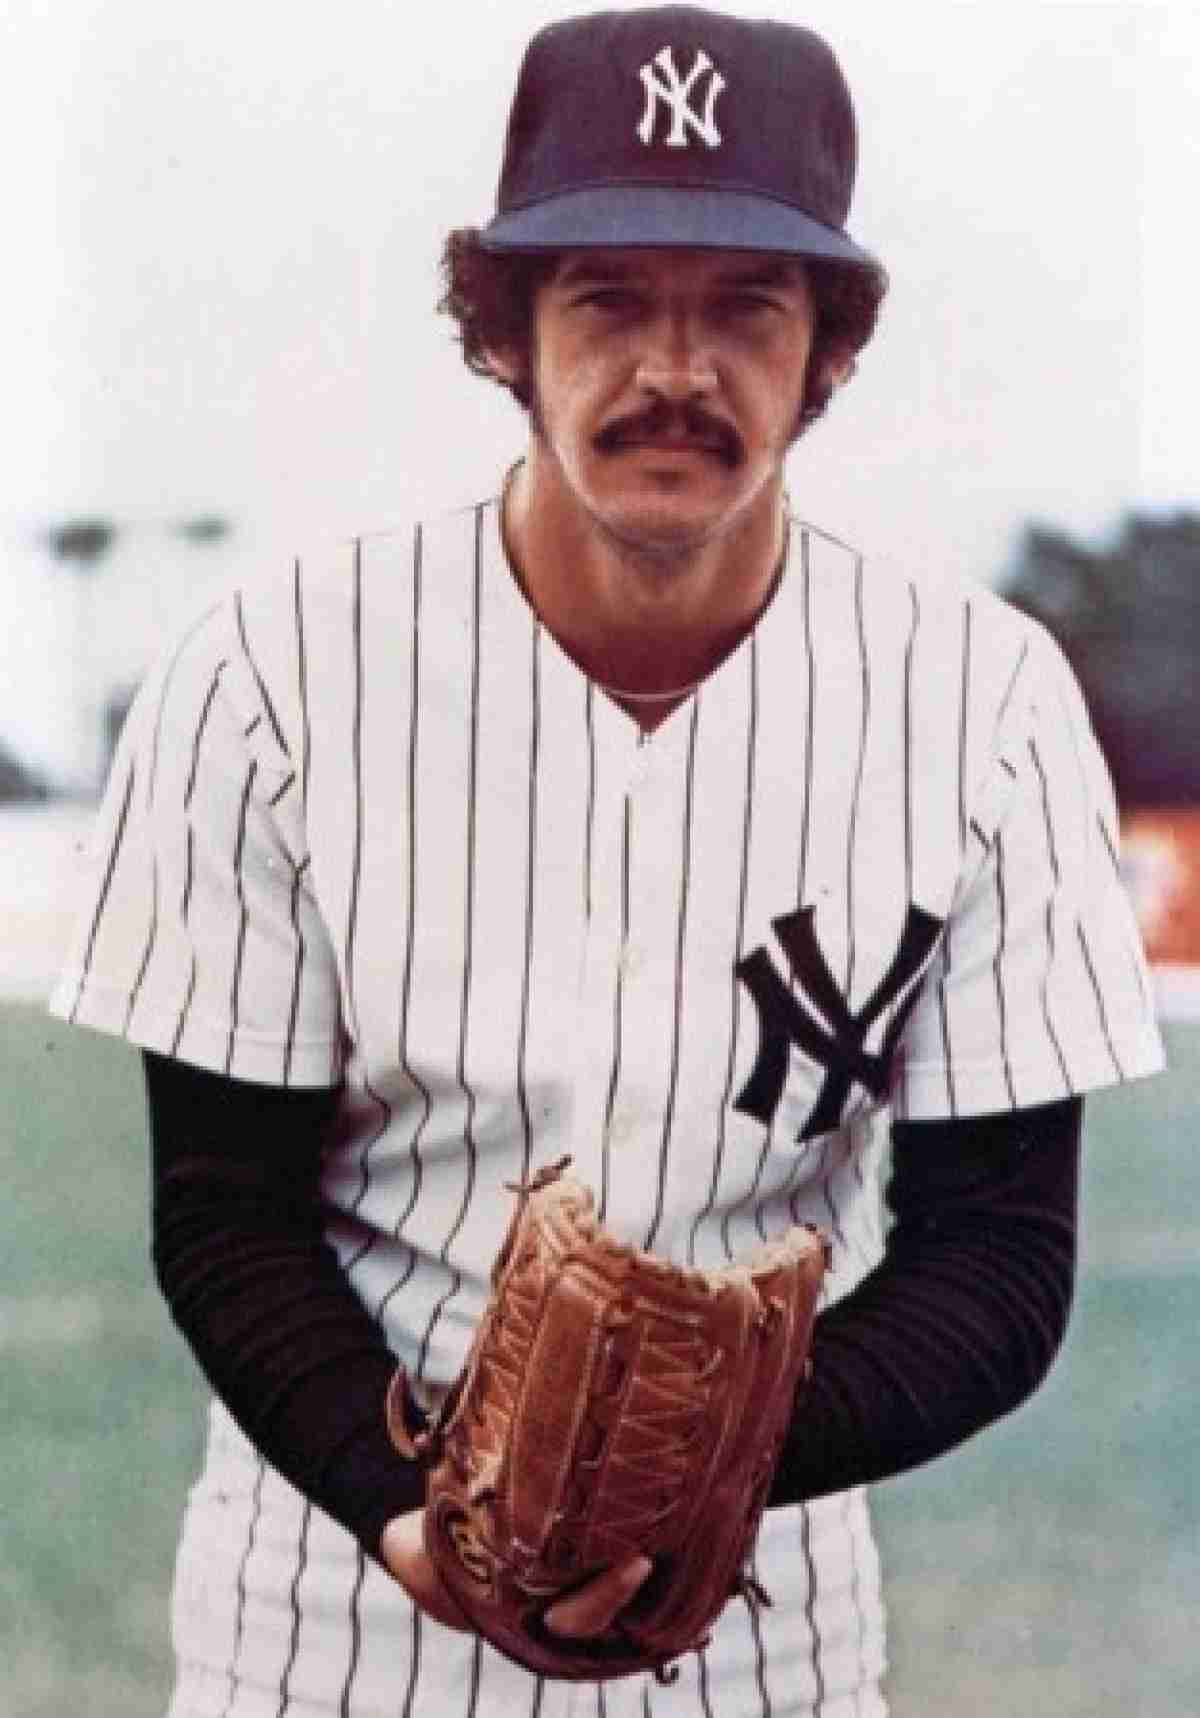 Ron Guidry - Ethnicity of Celebs